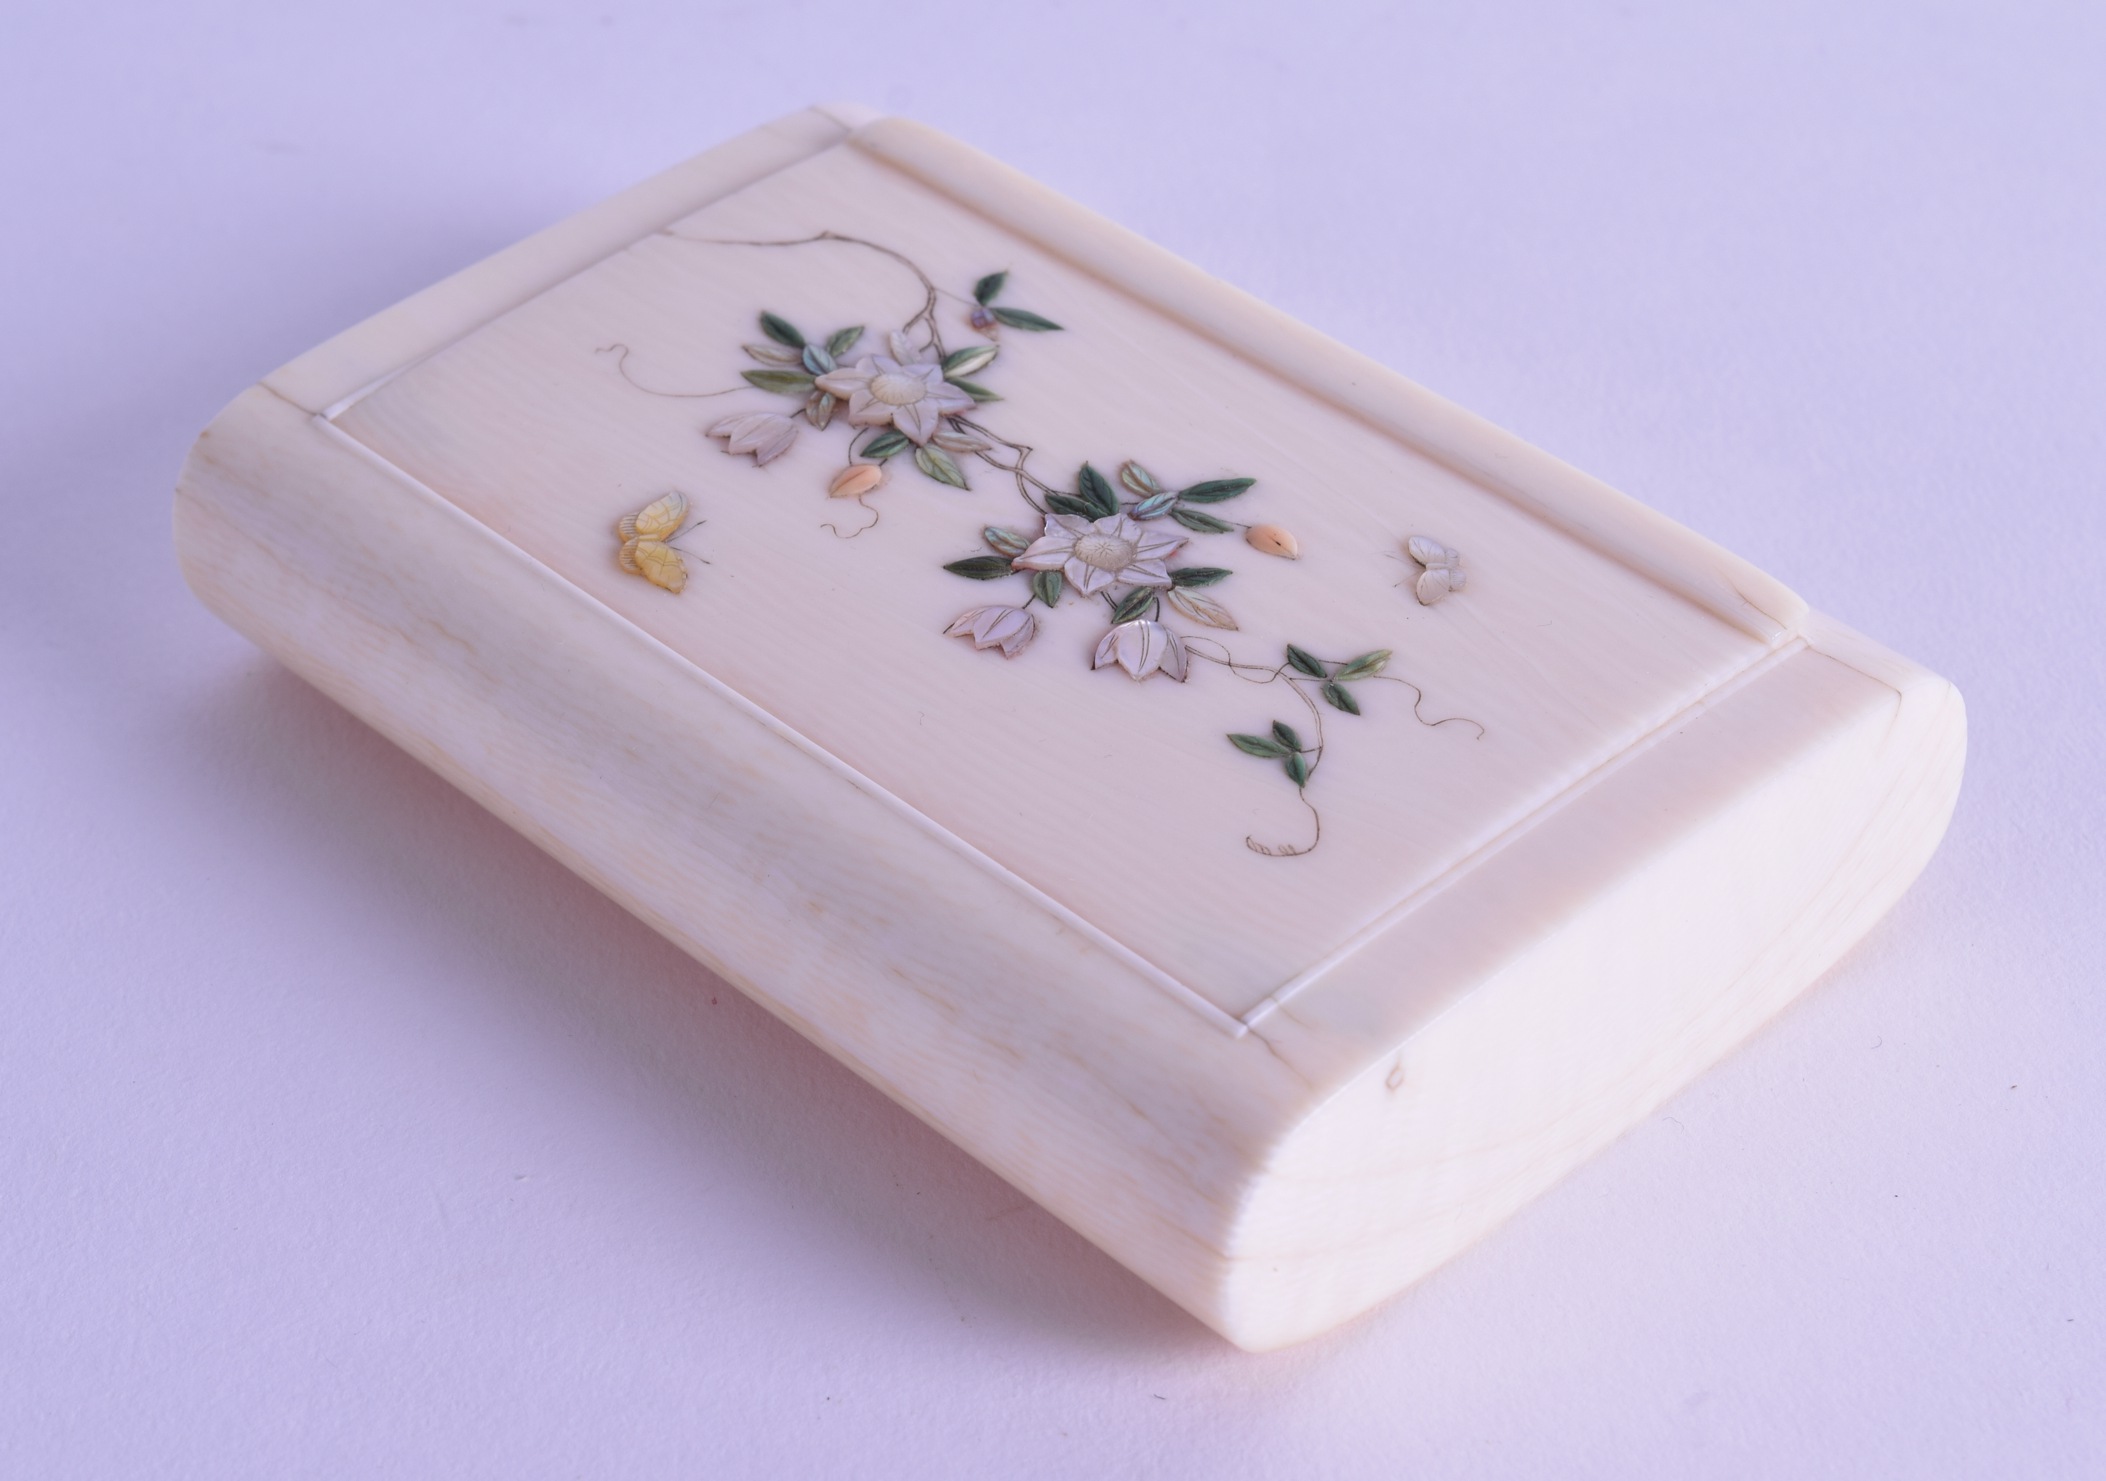 A LATE 19TH CENTURY JAPANESE MEIJI PERIOD CARVED IVORY BOX AND COVER shibayama inlaid with floral